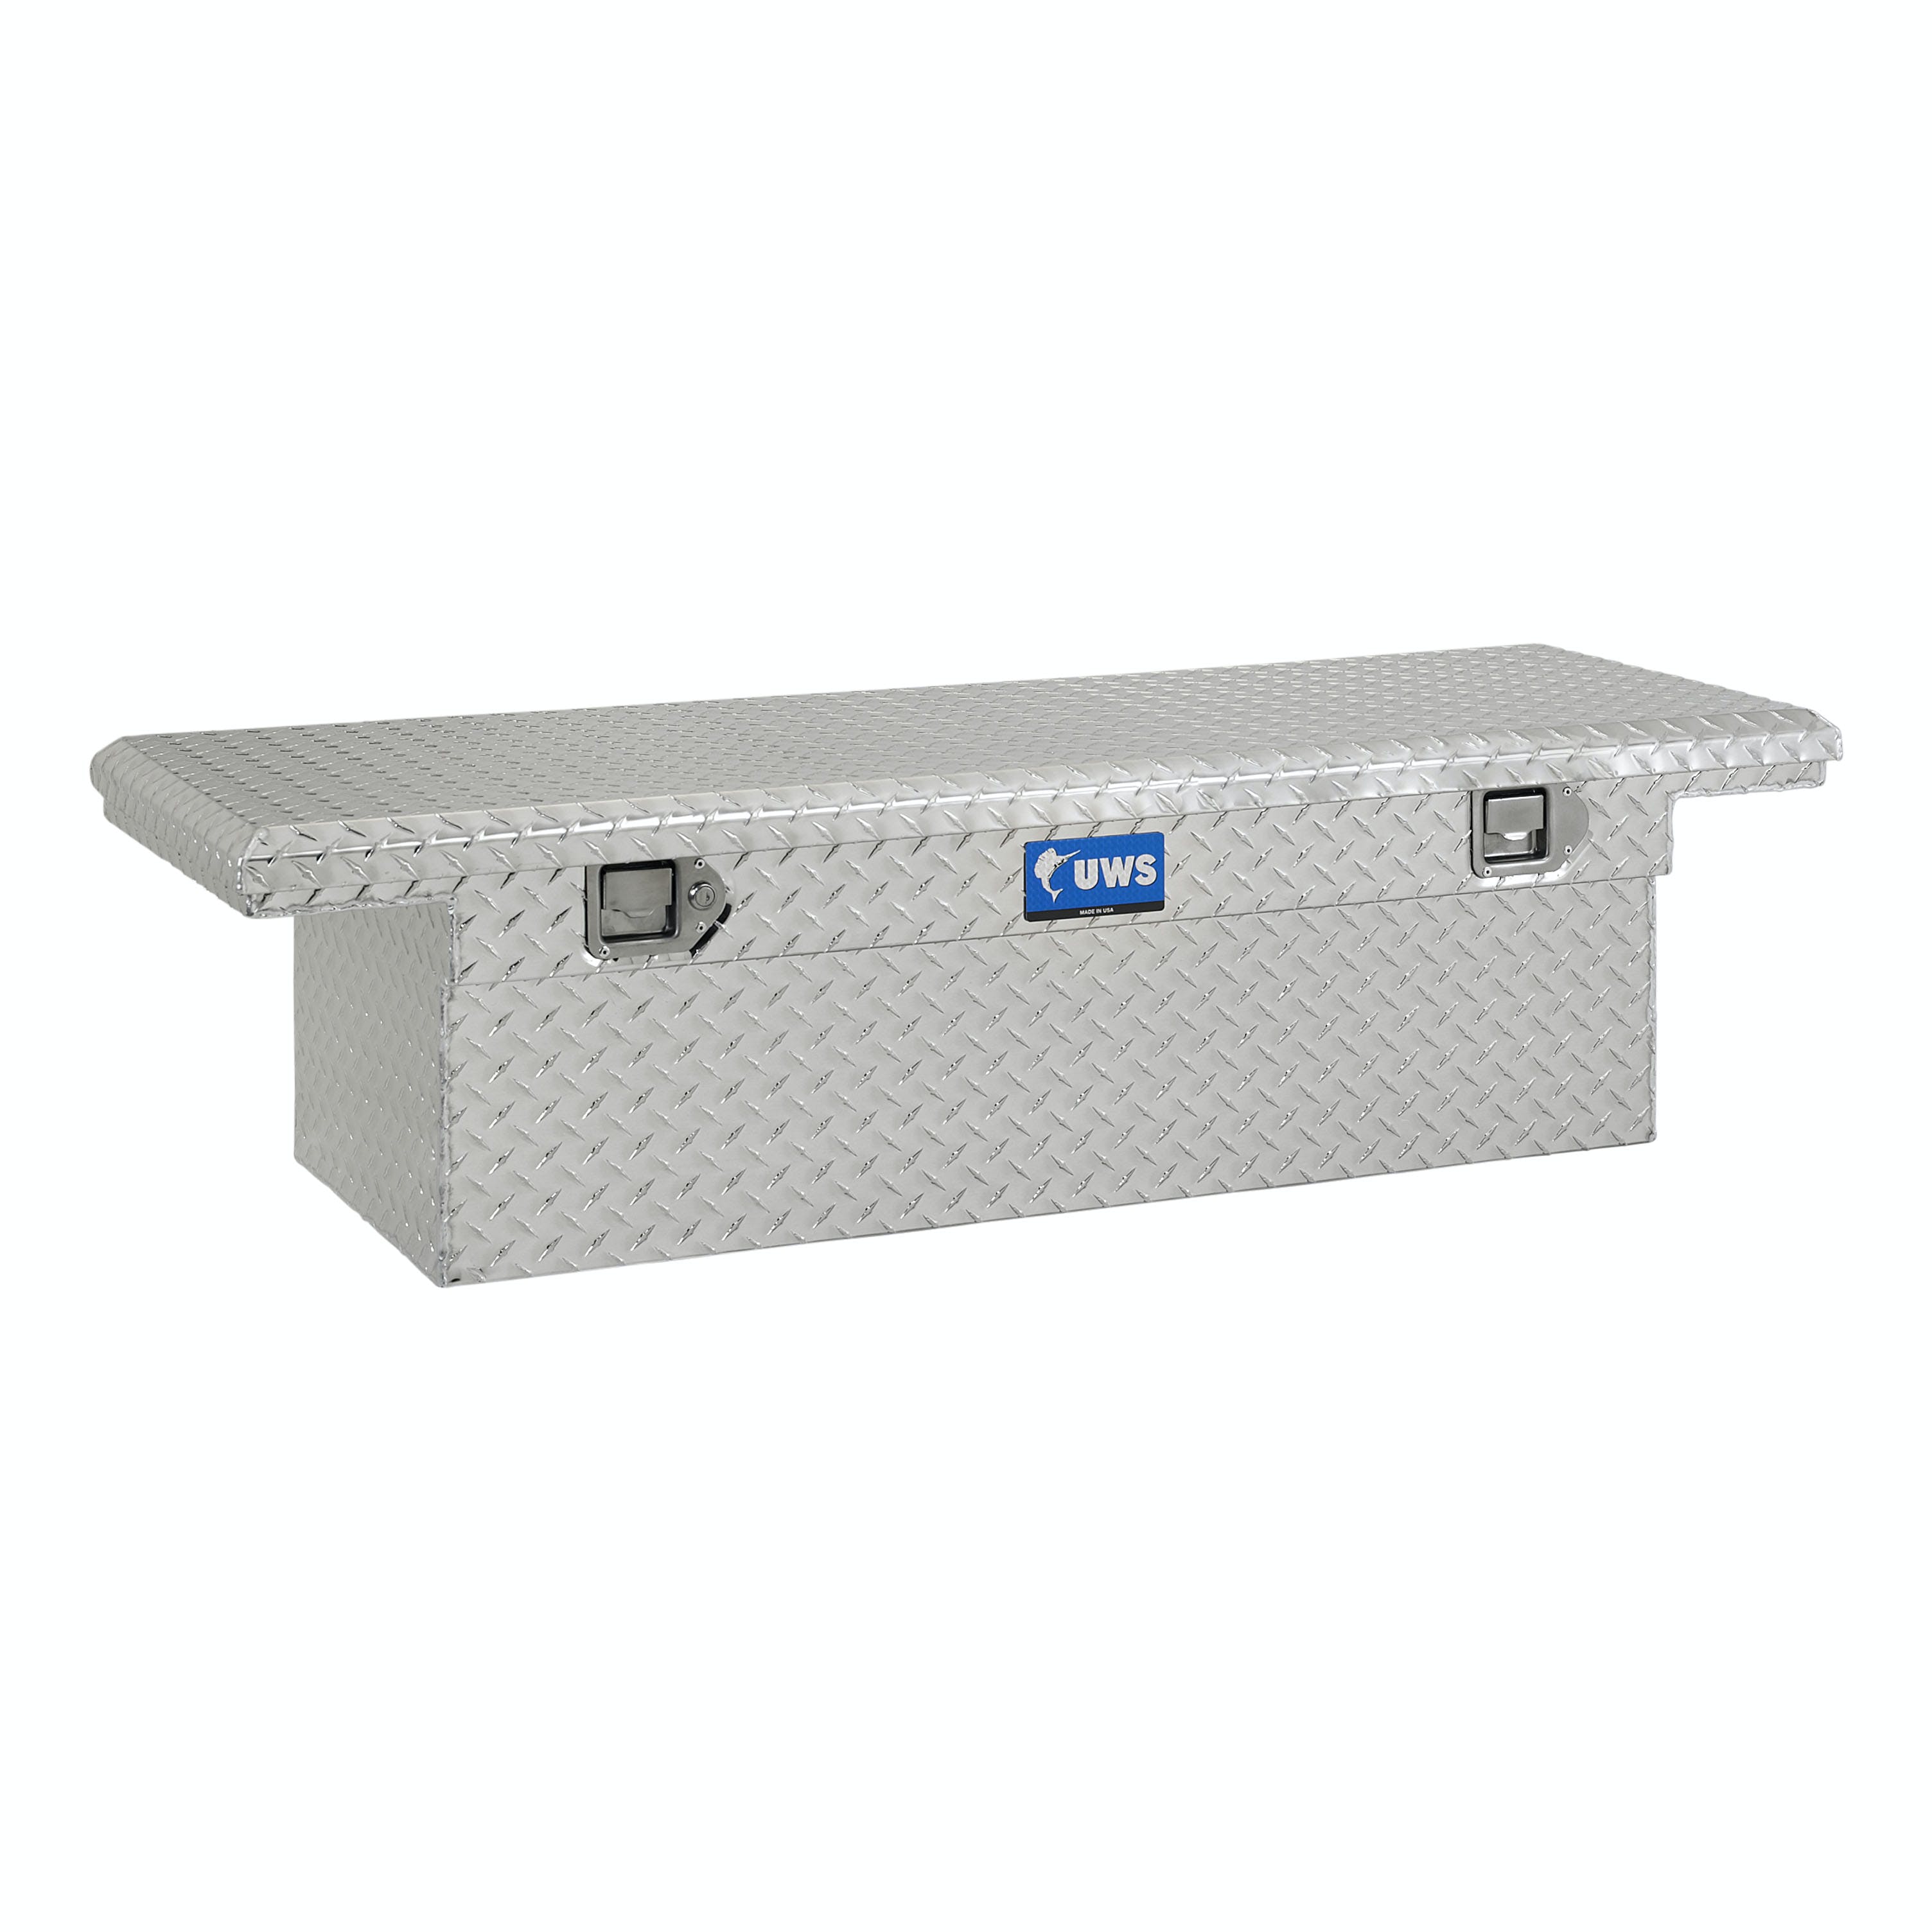 UWS TBS-54-LP 54 inch Aluminum Single Lid Crossover Toolbox Low Profile